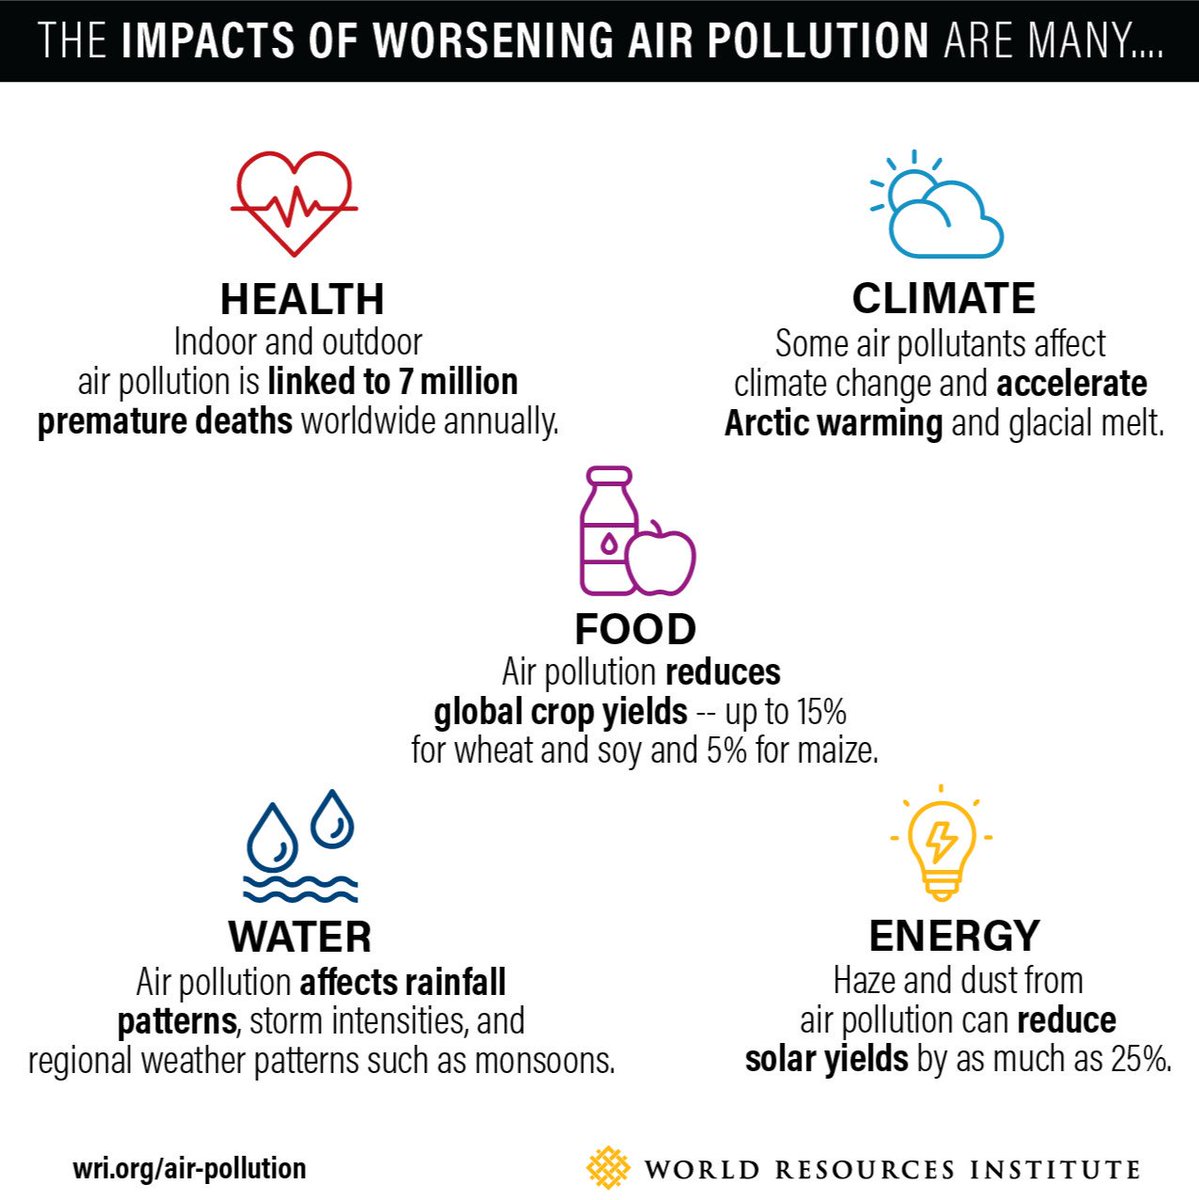 World Resources Inst Ar Twitter The Social Costs Of Air Pollution And The Social Benefits Of Reducing It Extend Far Beyond Health Including To Climate Water Renewable Energy And Agriculture Learn More T Co 9xiv3hsg9h Beatairpollution